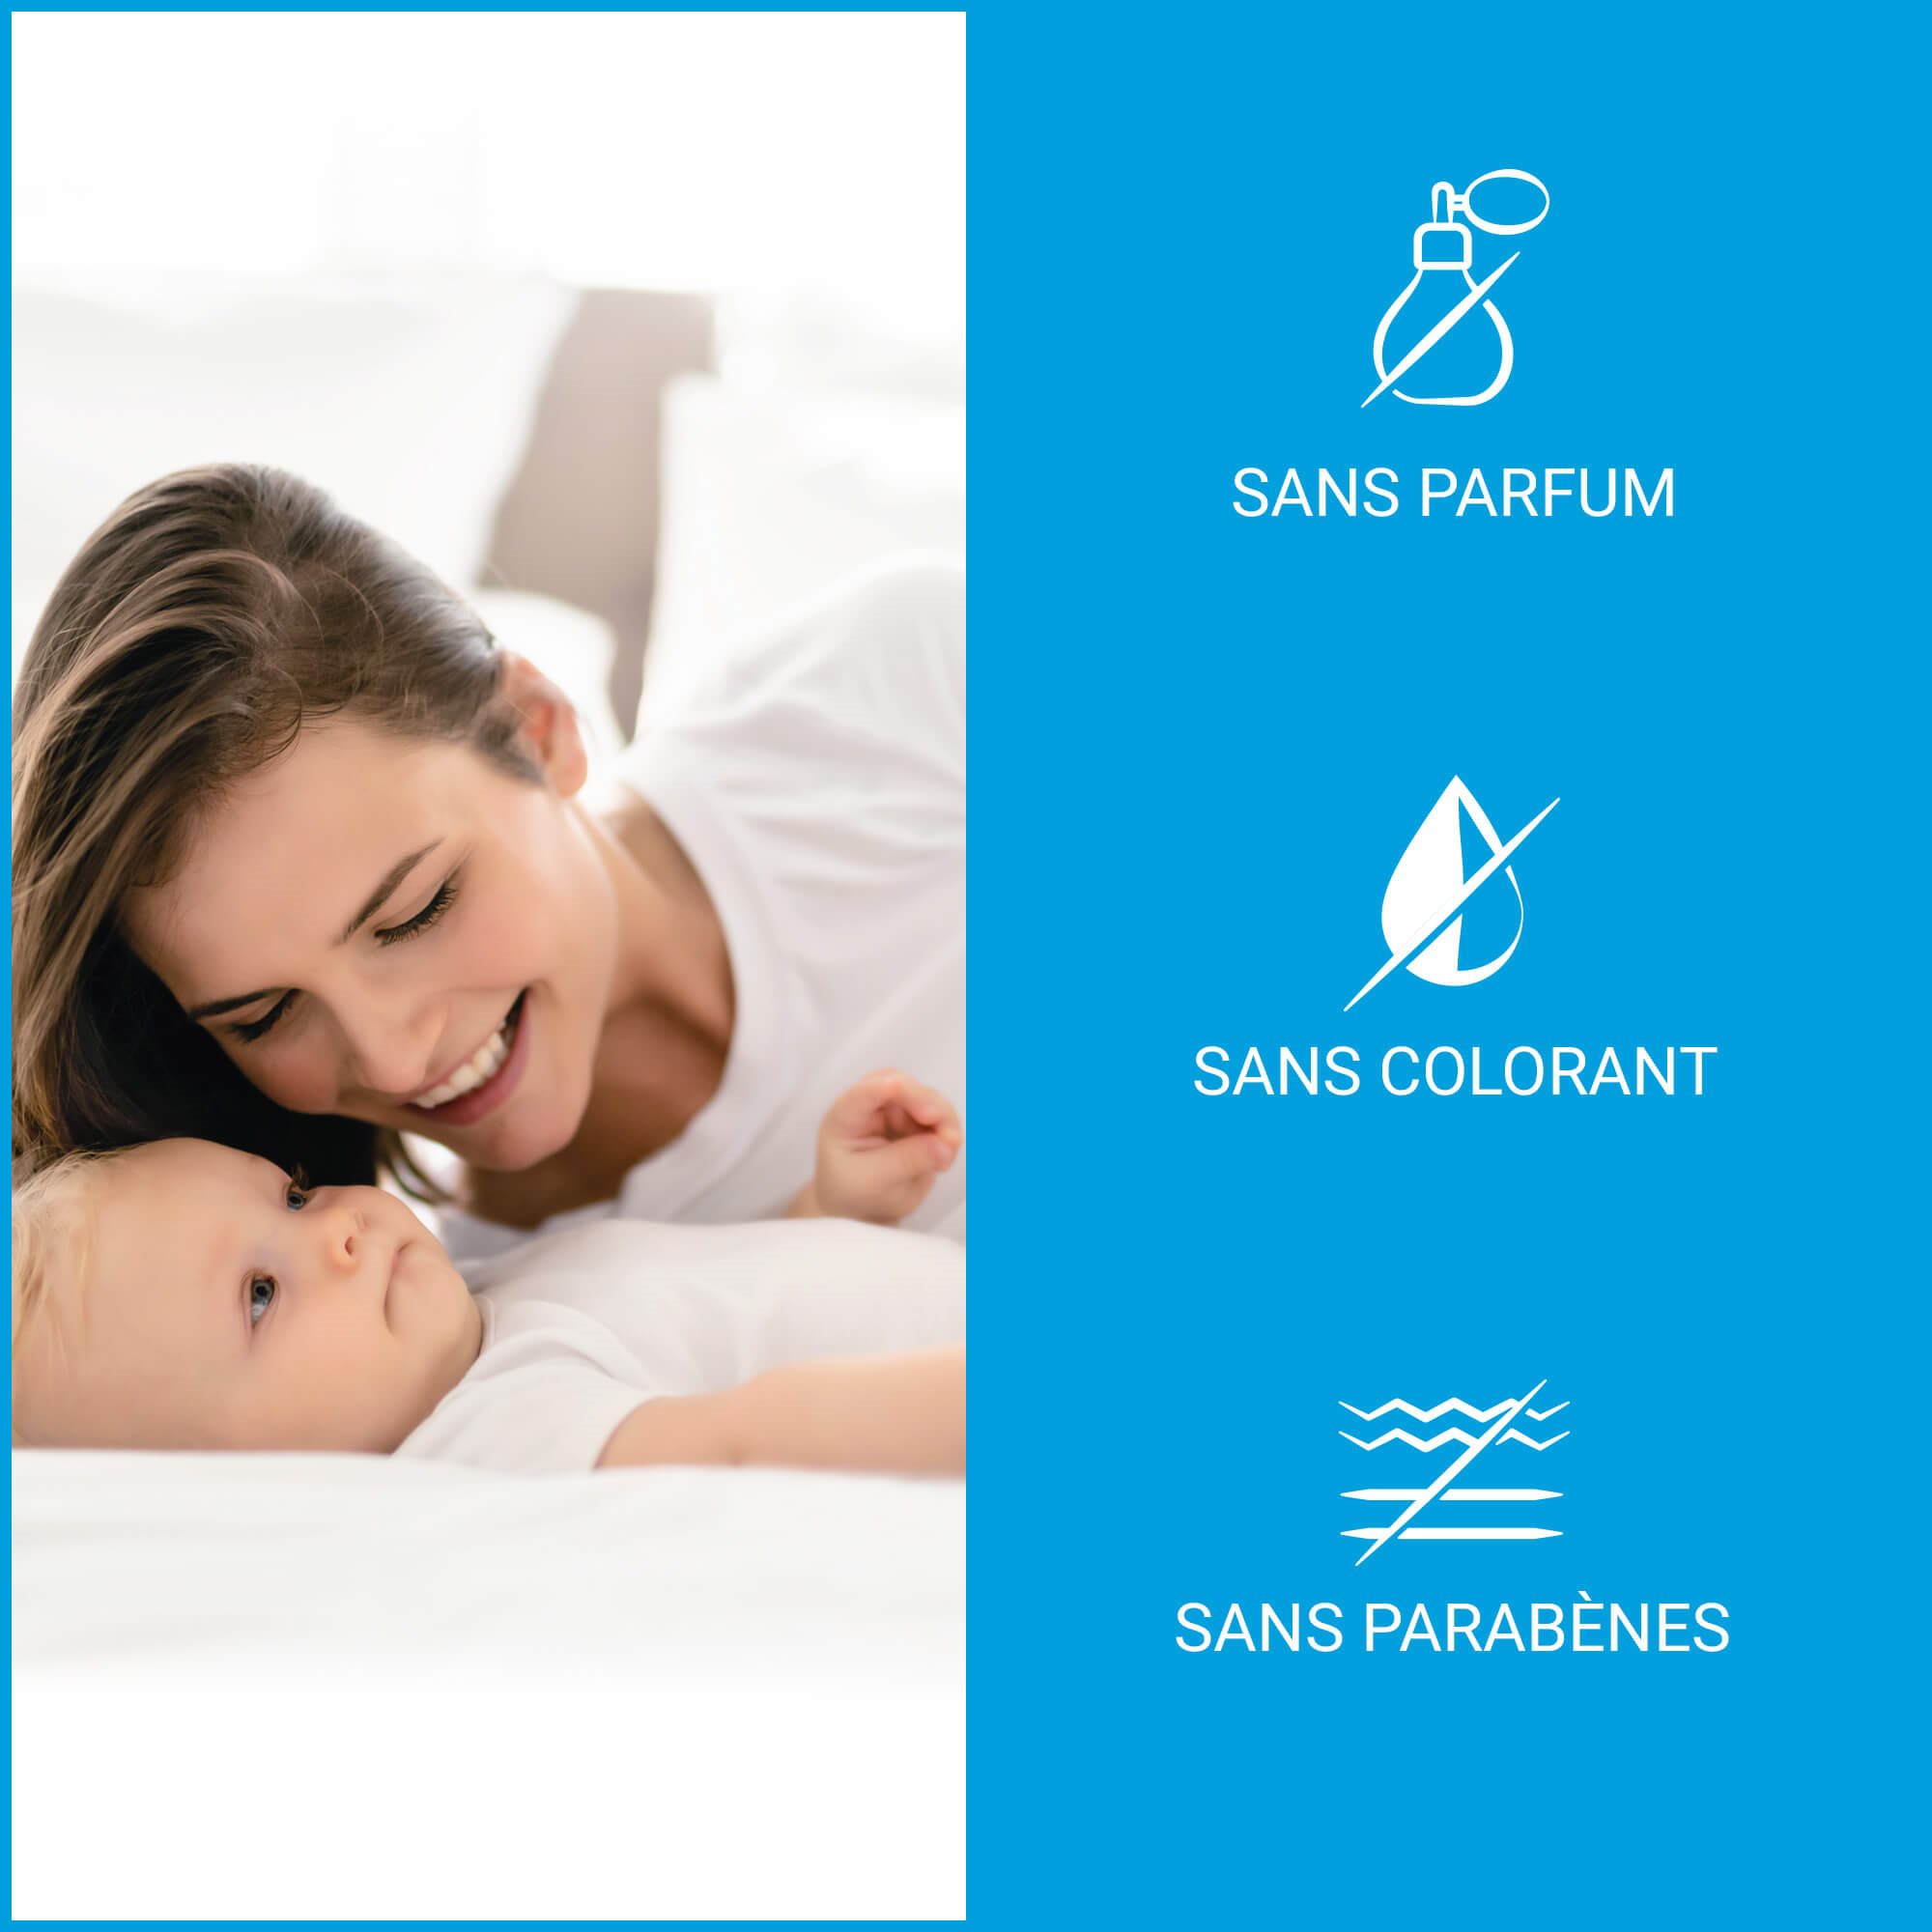 View of a smiling model and a baby with pillows in the background and white product text over a blue background.